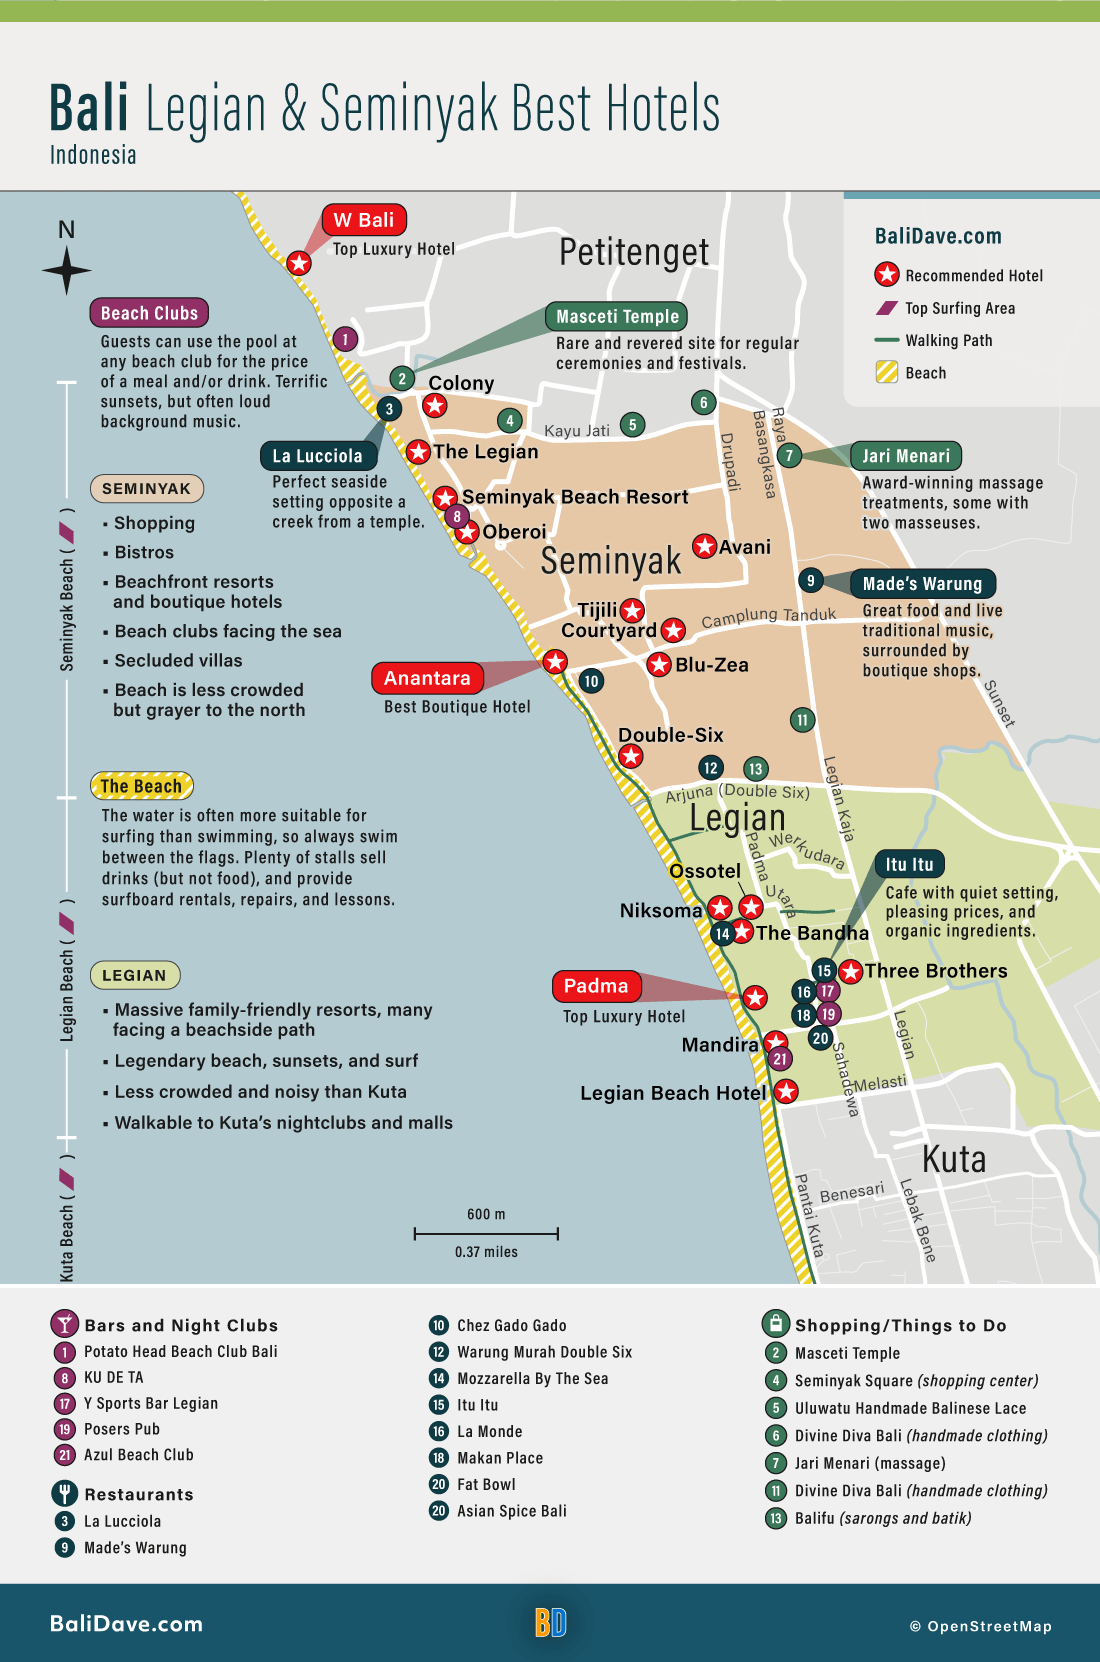 Map of the best hotels and things to do in Legian and Seminyak Bali.